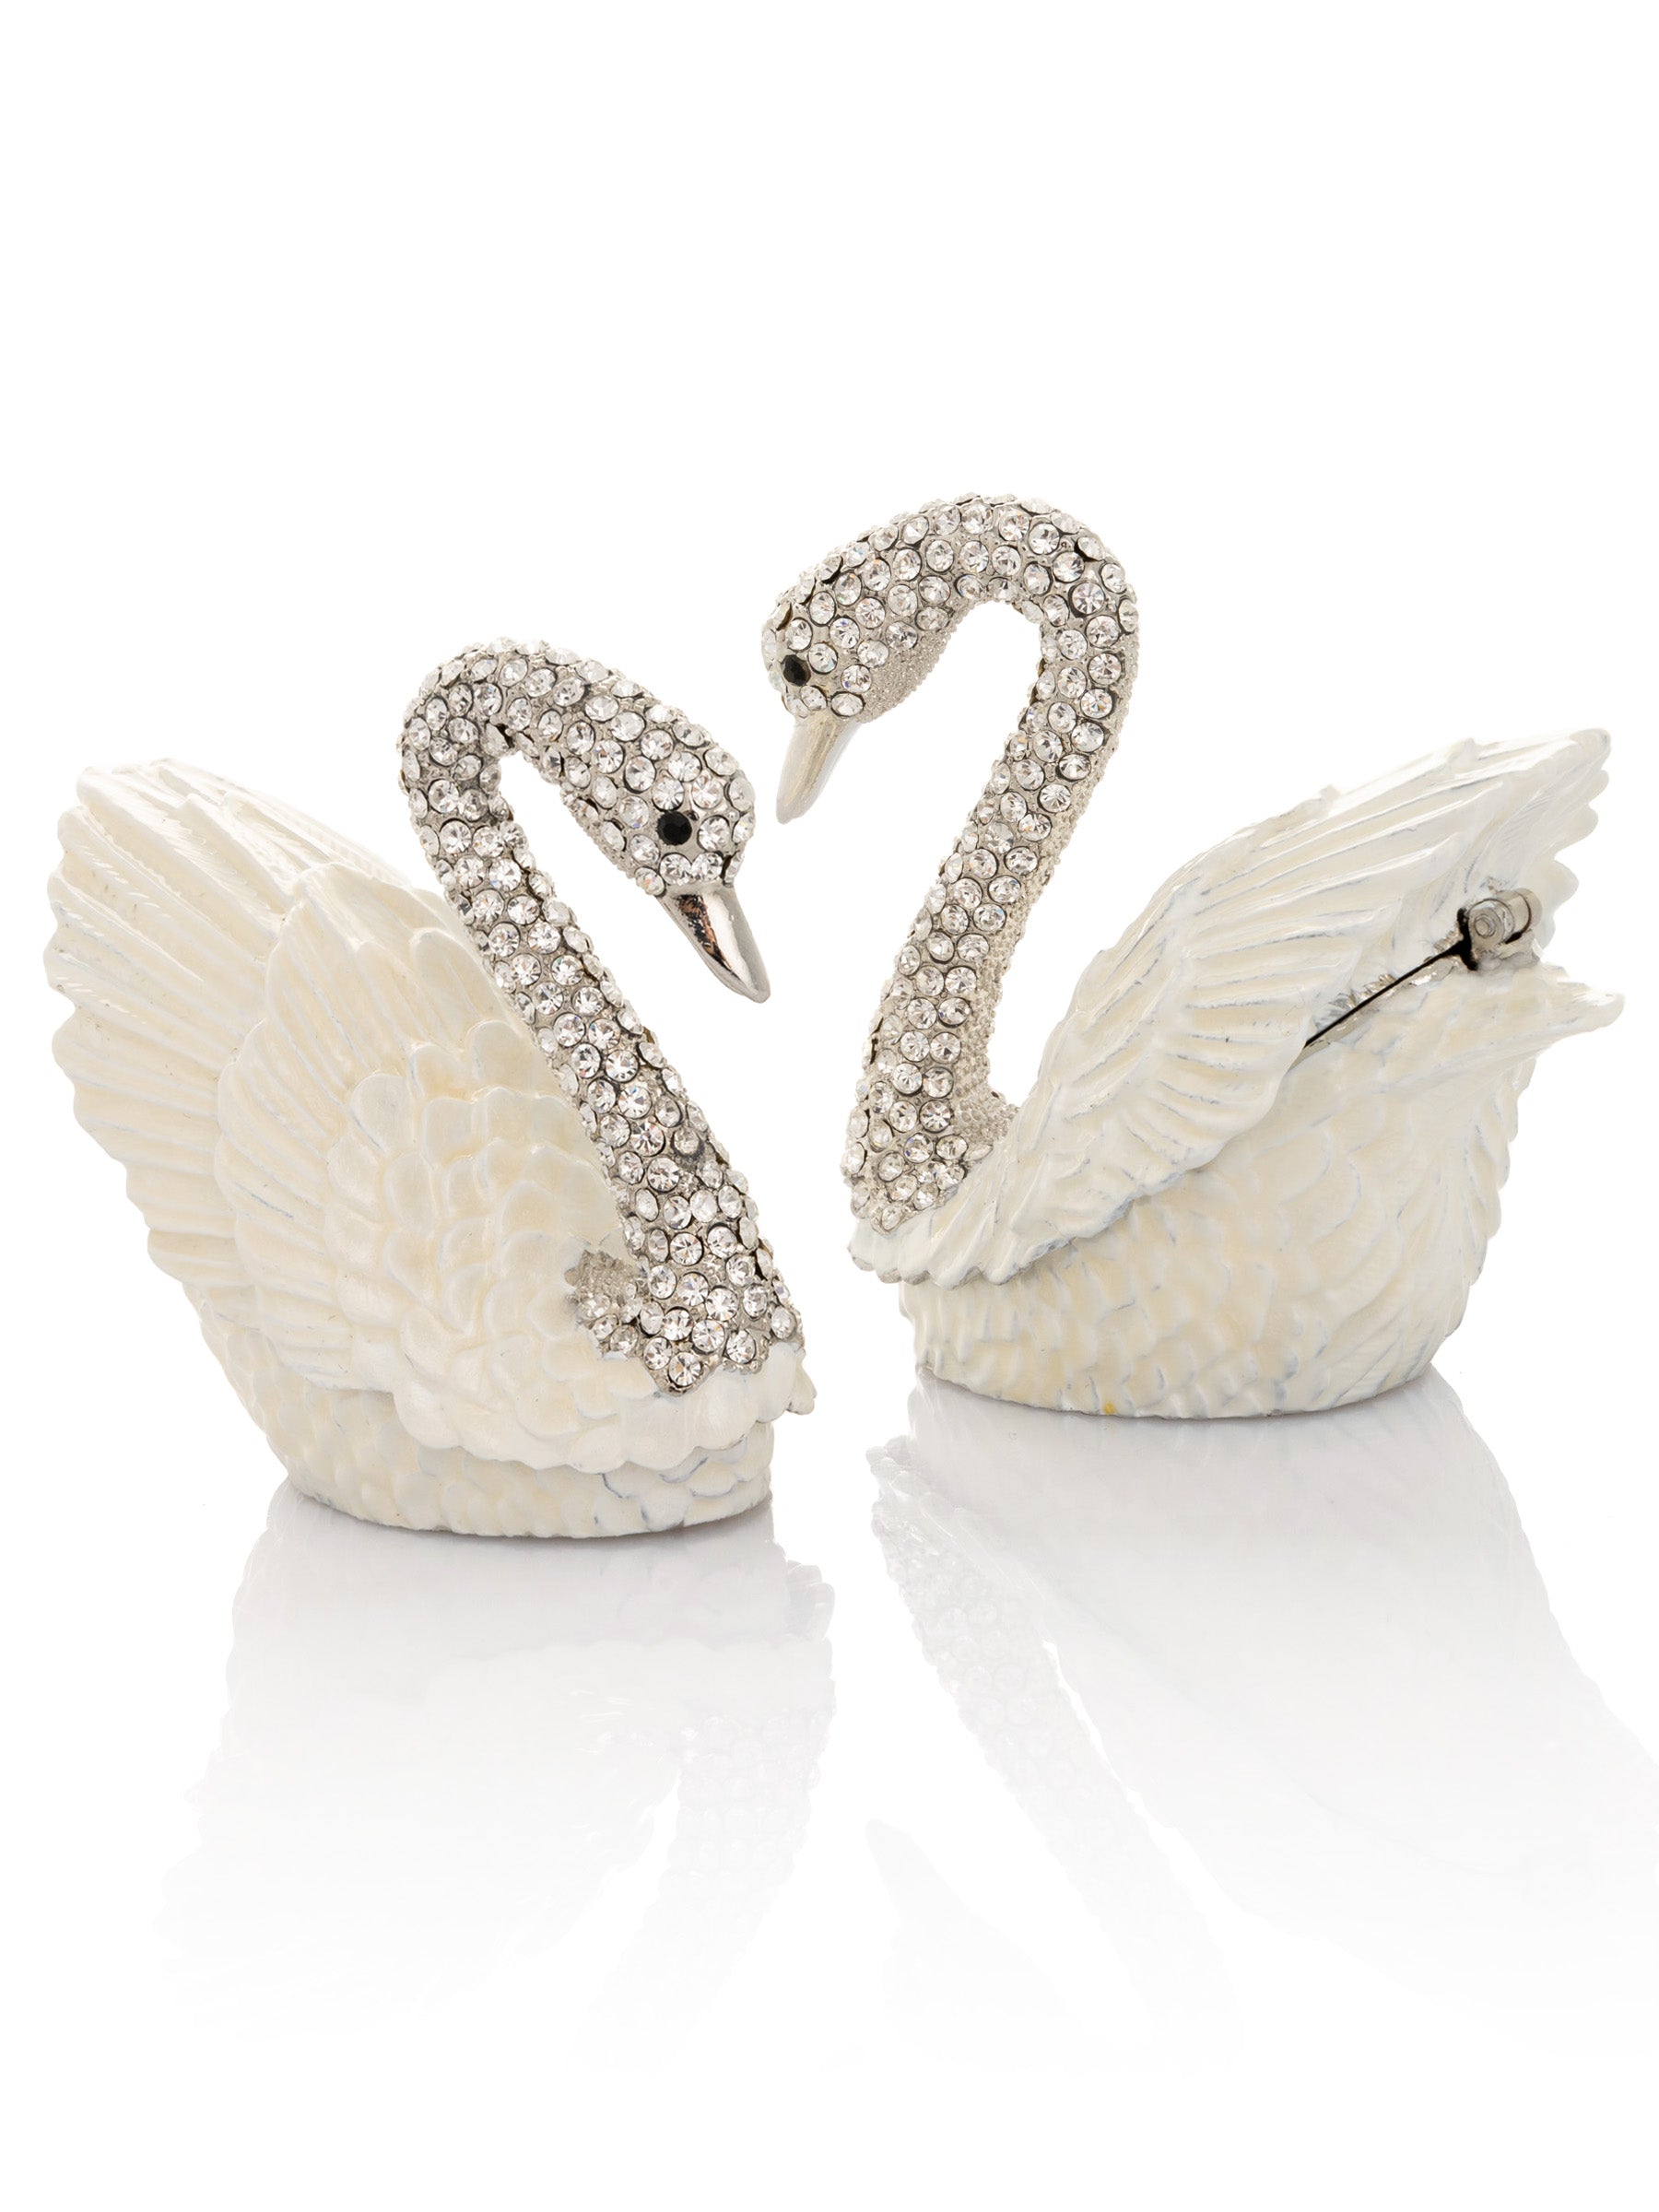 White Swan with crystal neck